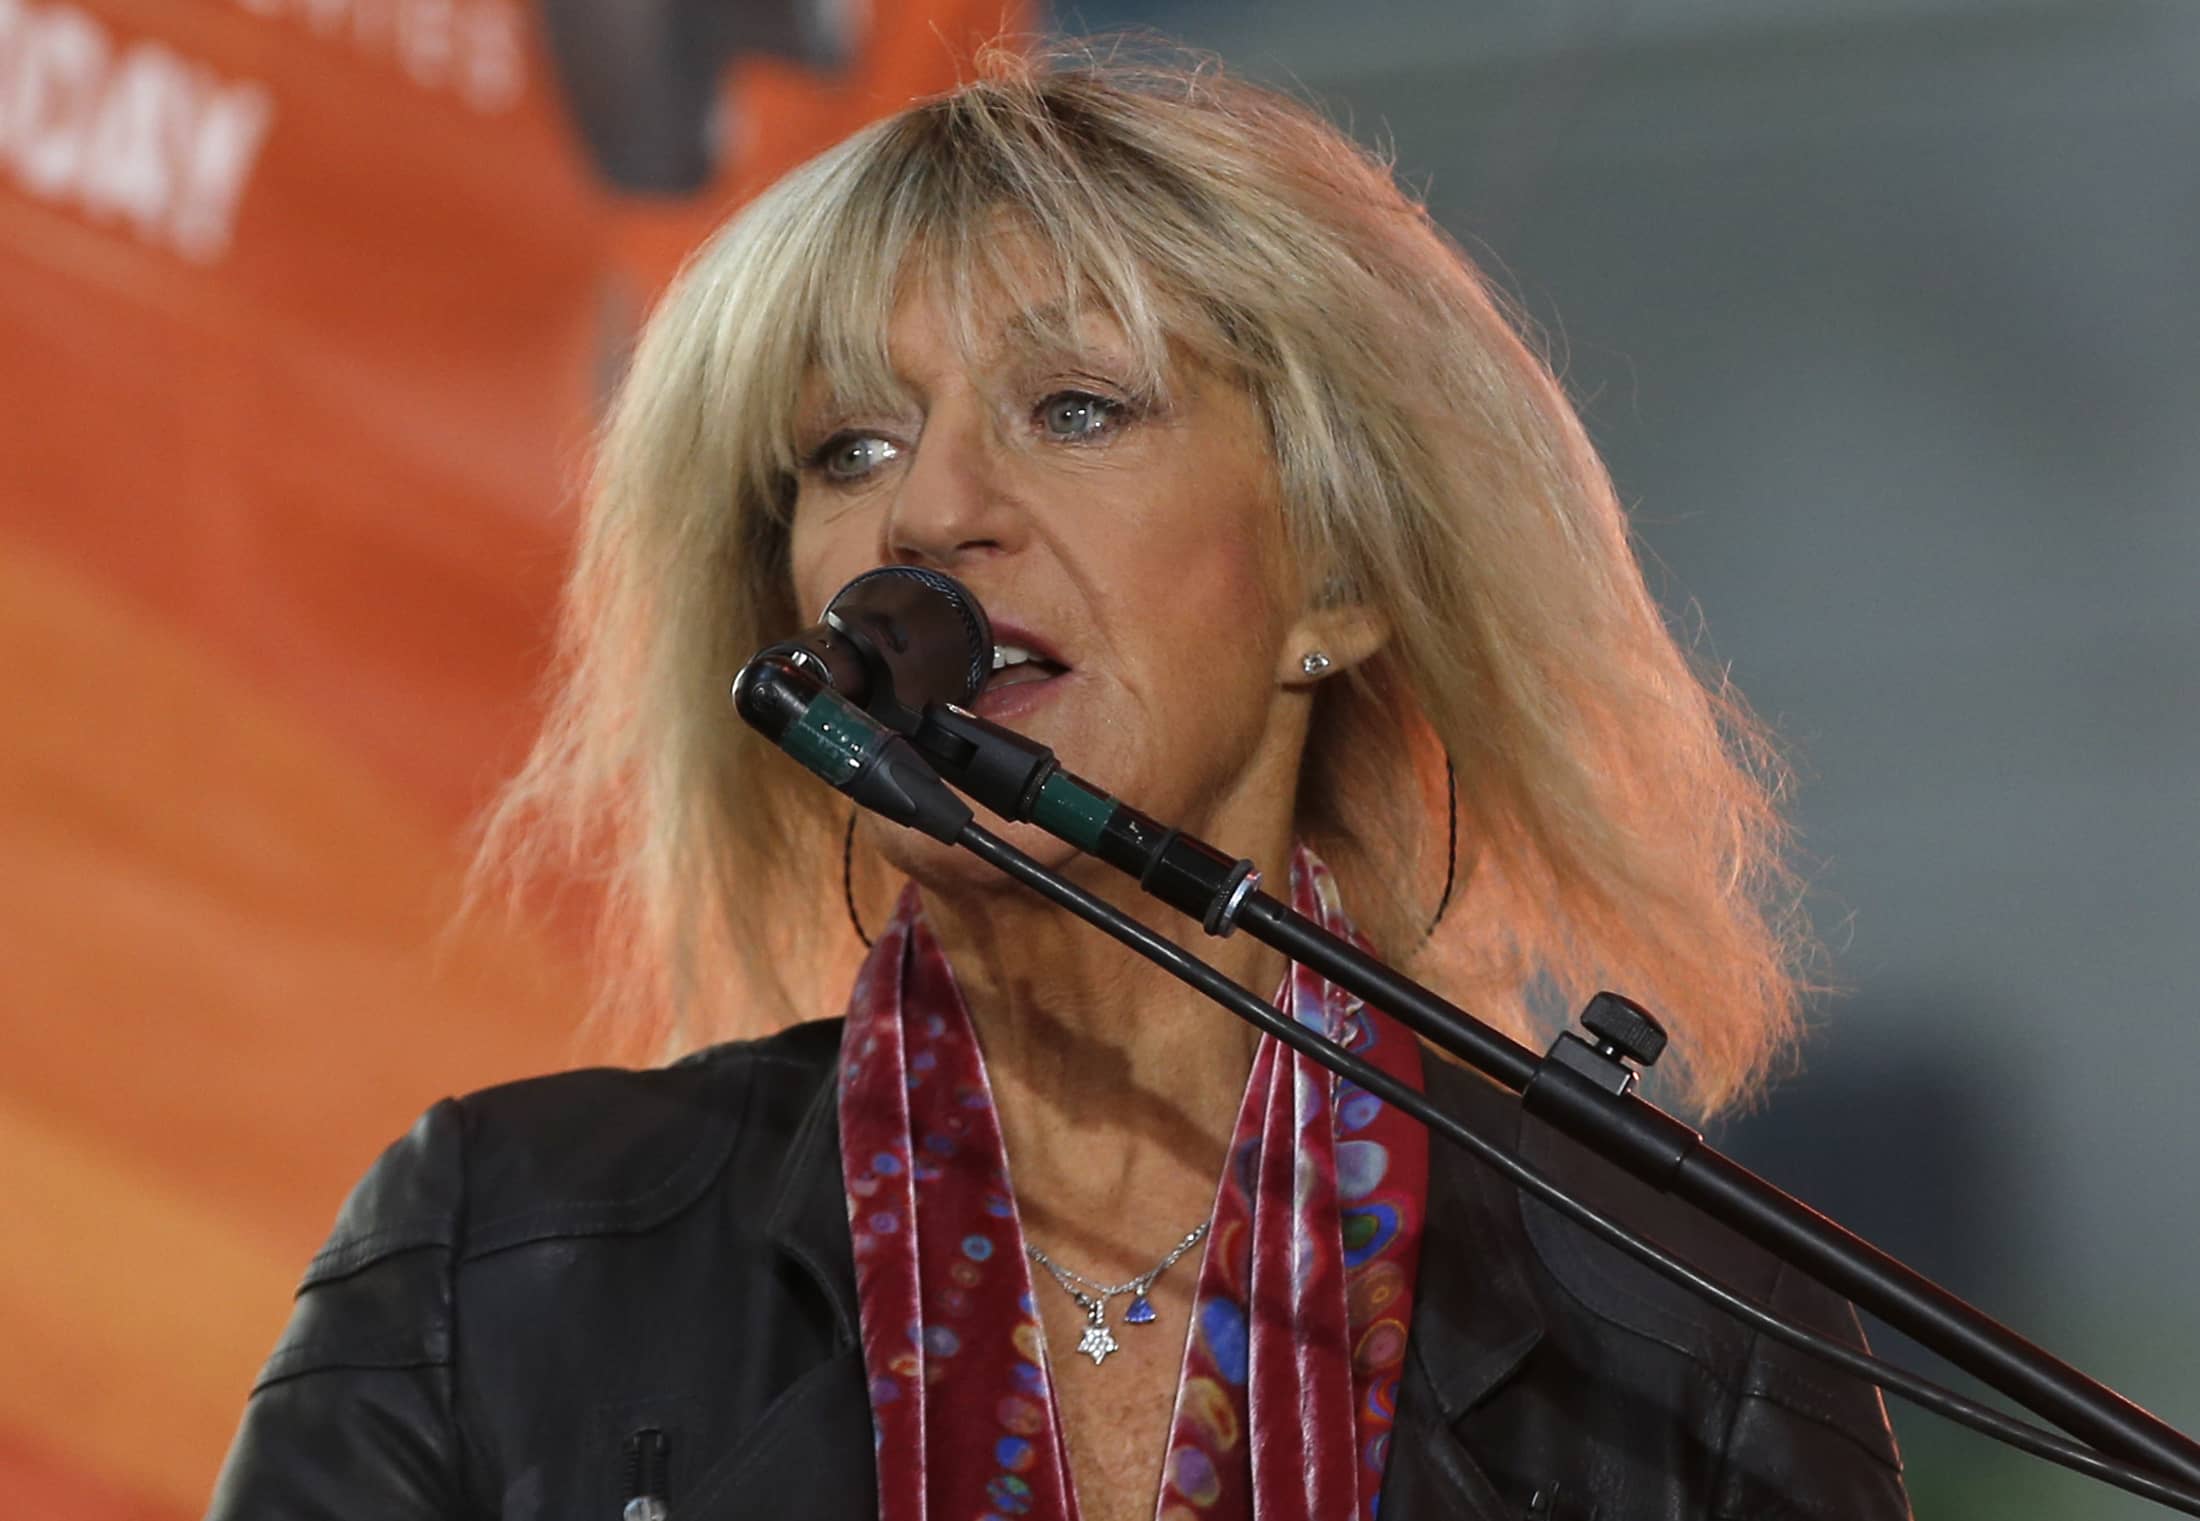 keyboardist-and-singer-christine-mcvie-of-the-rock-band-fleetwood-mac-performs-on-nbcs-today-show-in-new-york-city-2